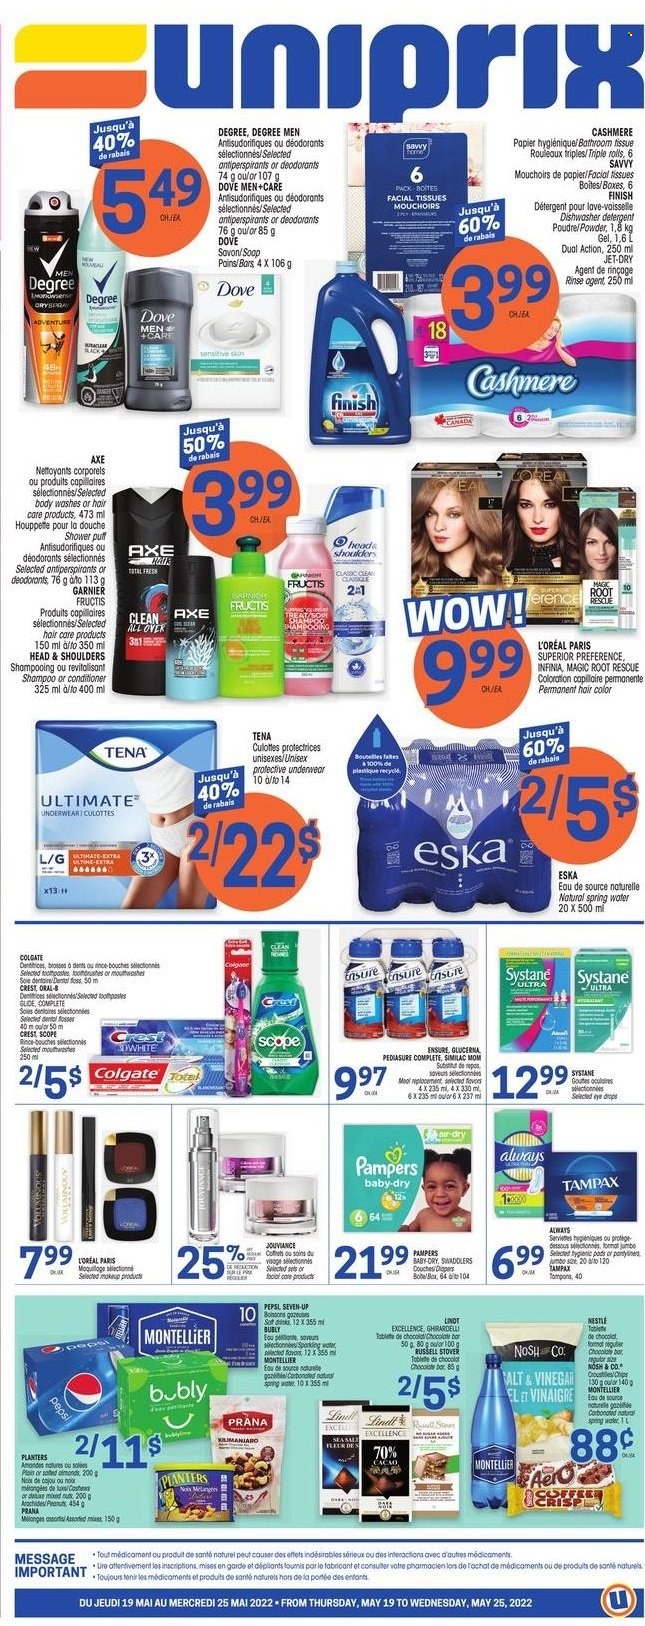 thumbnail - Uniprix Flyer - May 19, 2022 - May 25, 2022 - Sales products - chocolate bar, chips, Planters, Pepsi, spring water, Similac, nappies, bath tissue, Jet, Crest, facial tissues, L’Oréal, conditioner, hair color, Fructis, Axe, Glucerna, detergent, Dove, Colgate, Garnier, Nestlé, shampoo, Systane, Tampax, Head & Shoulders, Pampers, deodorant. Page 1.